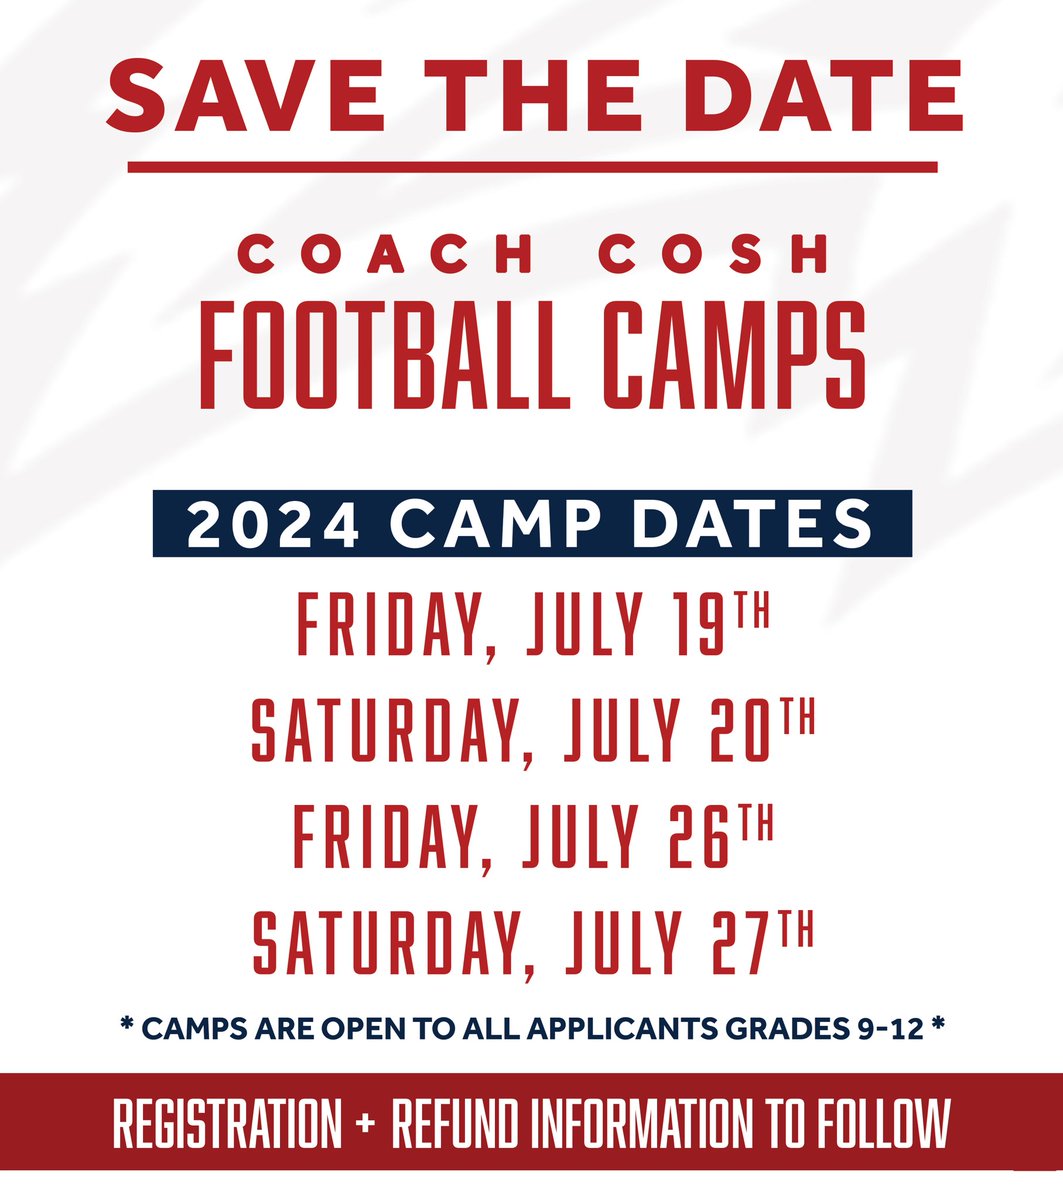 Mark your calendars! 📅 Coach Cosh football camps are coming up in July! ☀️🏈 🌊🐺 x #As1